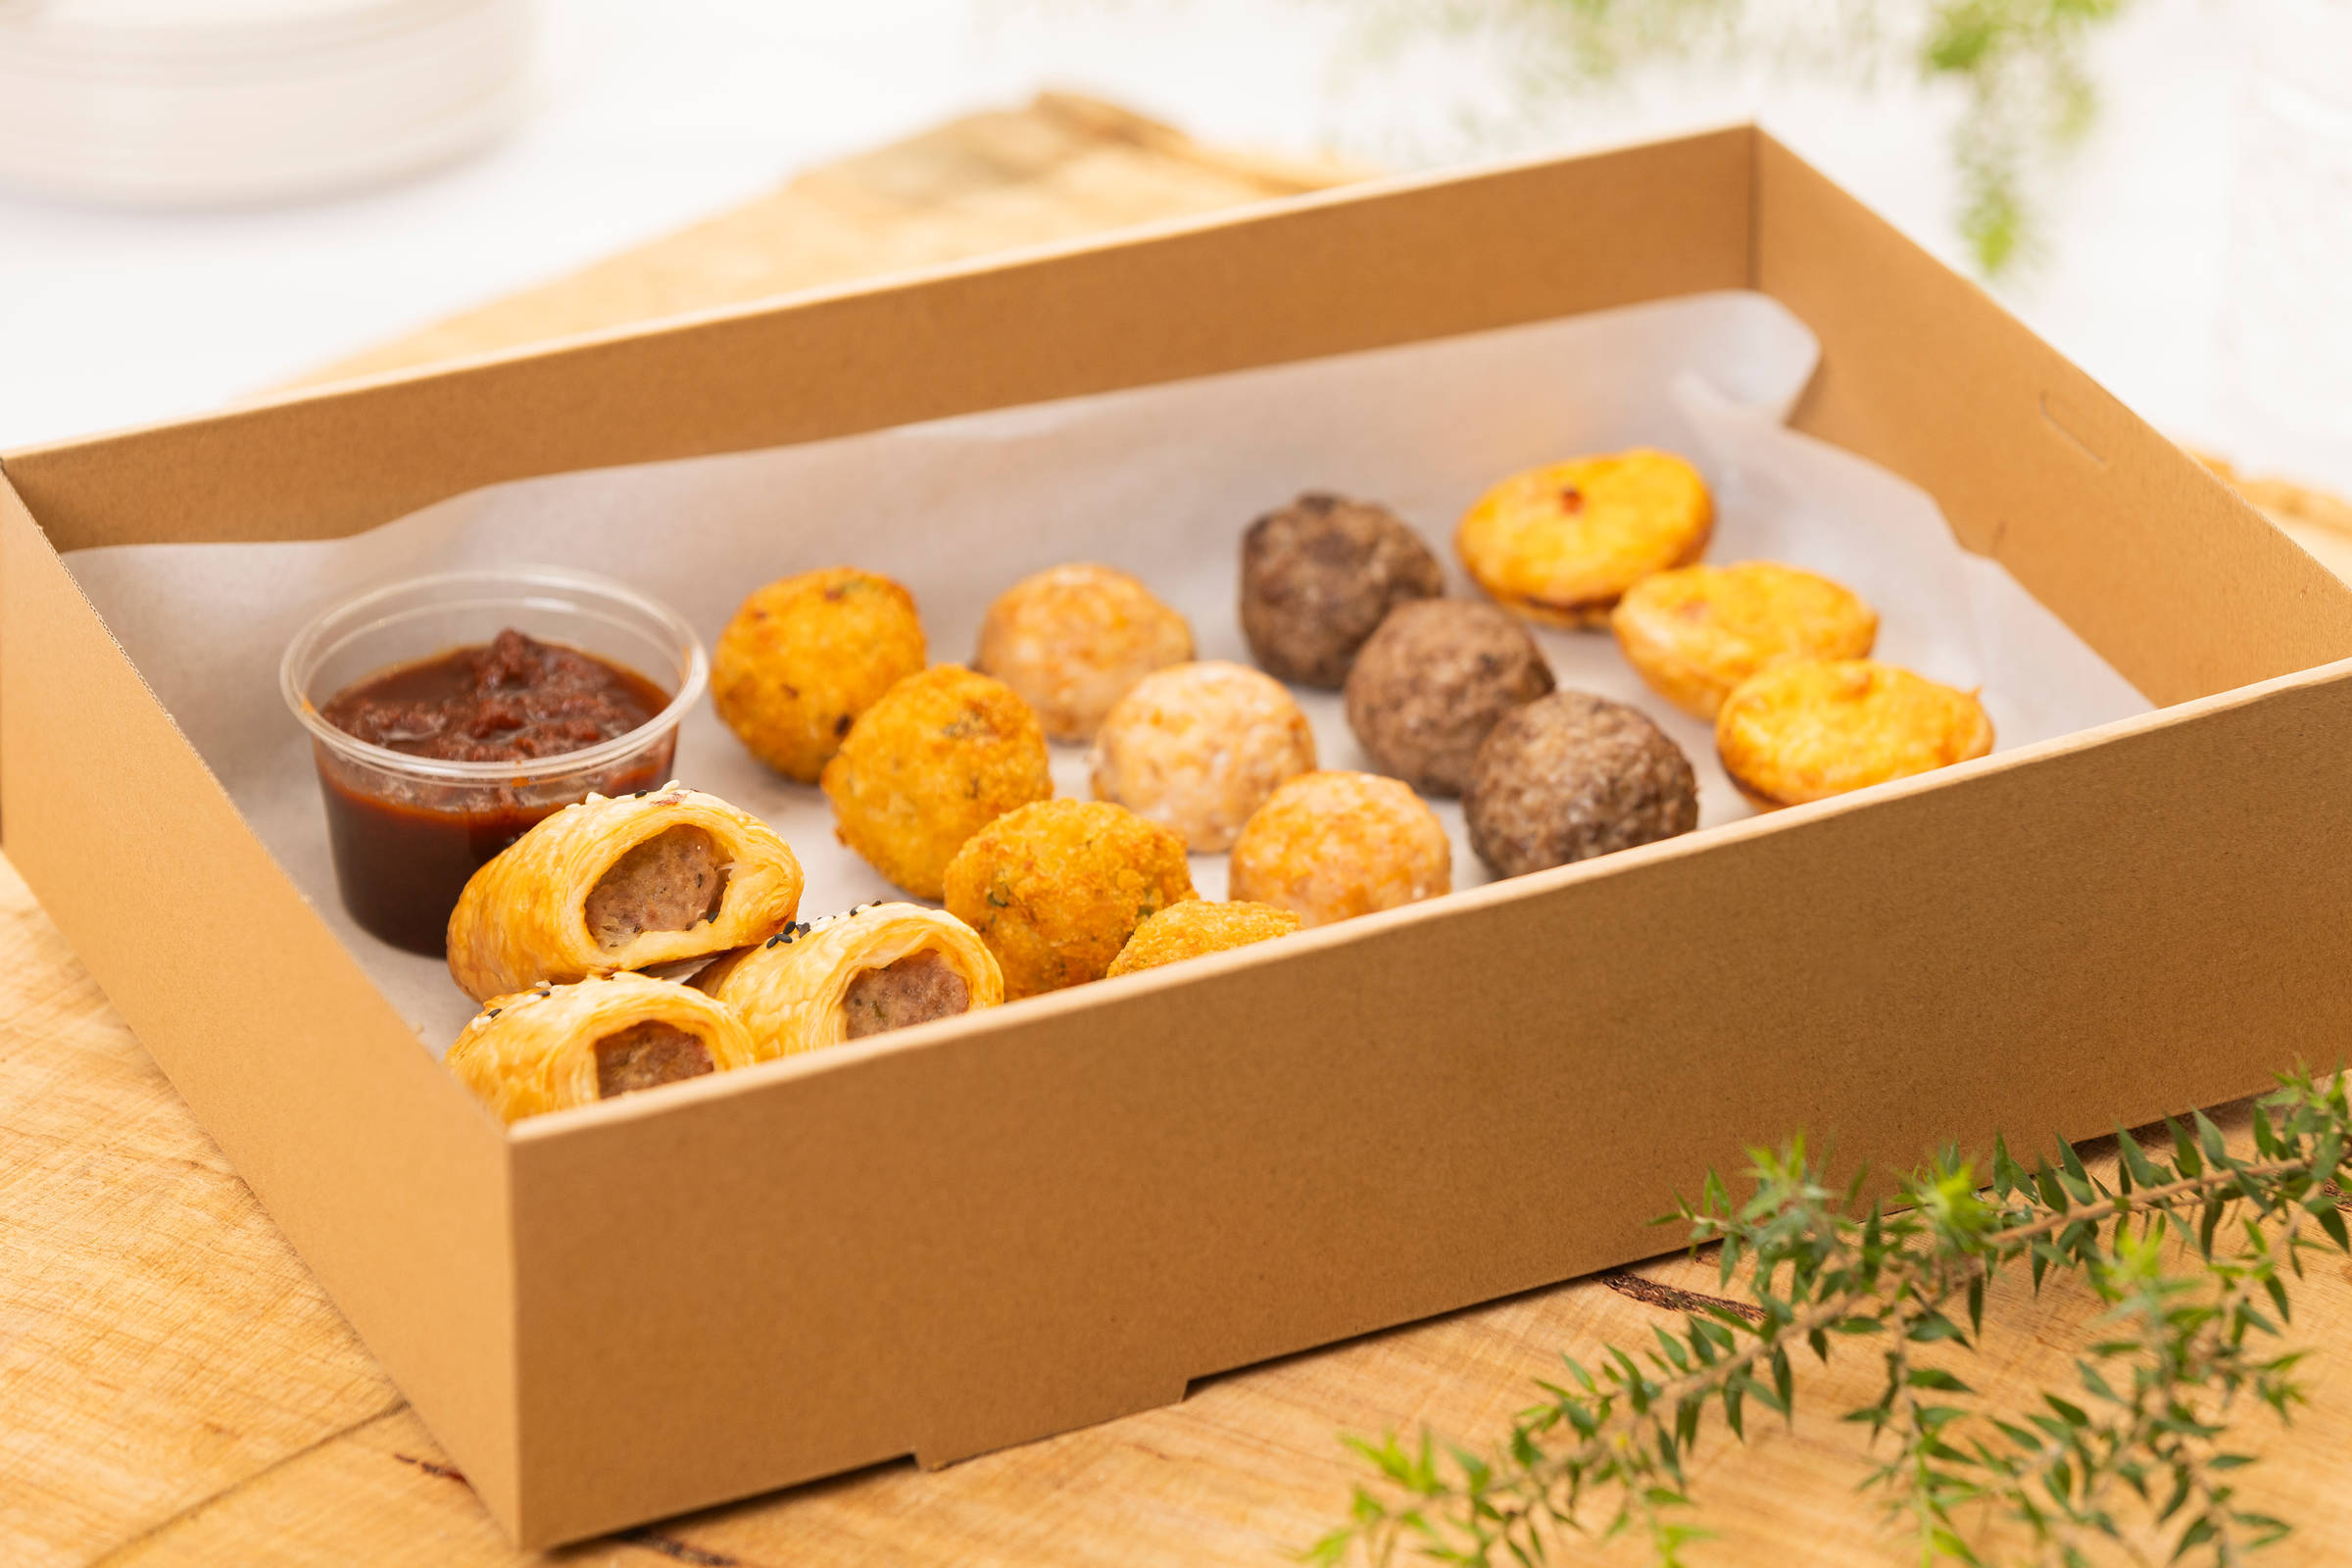 Hot Savoury box containing 25 items: Sausage rolls, Chicken balls, Smoked salmon arancini, Bacon and cheese tartlets, Meatballs. Credit: Richard Jupe.